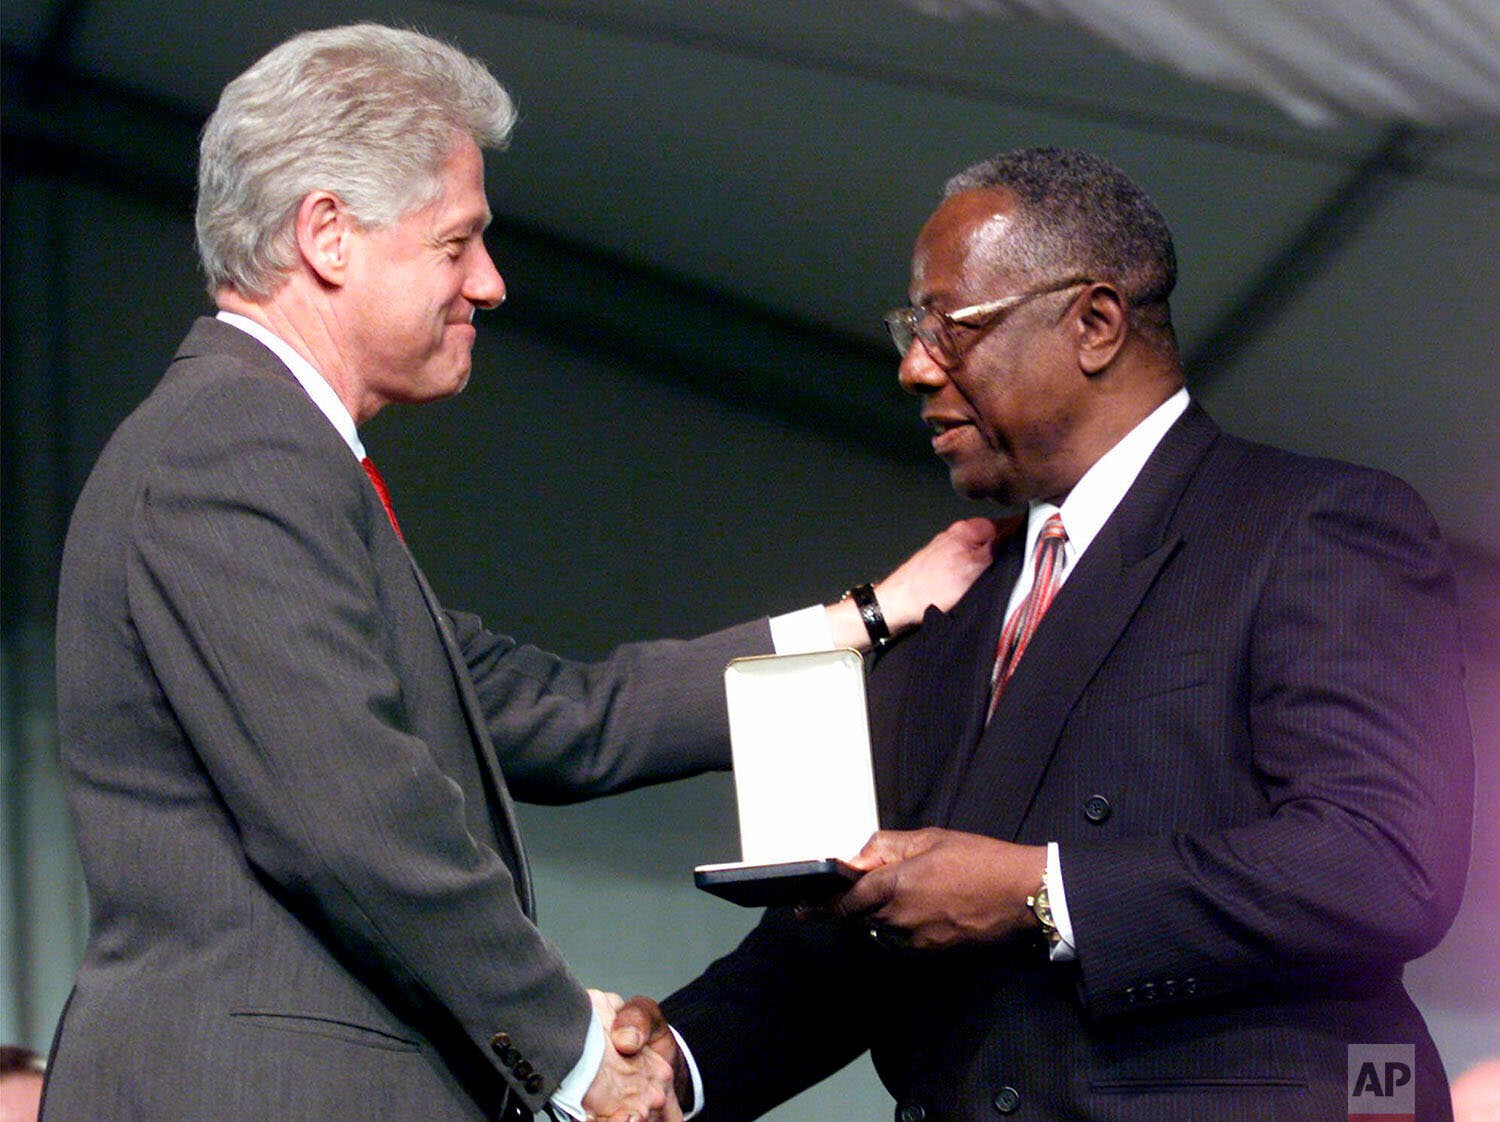  President Clinton presents baseball great Hank Aaron with a Presidential Citizens Medal during a ceremony at the White House Monday, Jan. 8, 2001. The Presidential Citizens Medal was established by President Richard Nixon in 1969 to recognize exempl